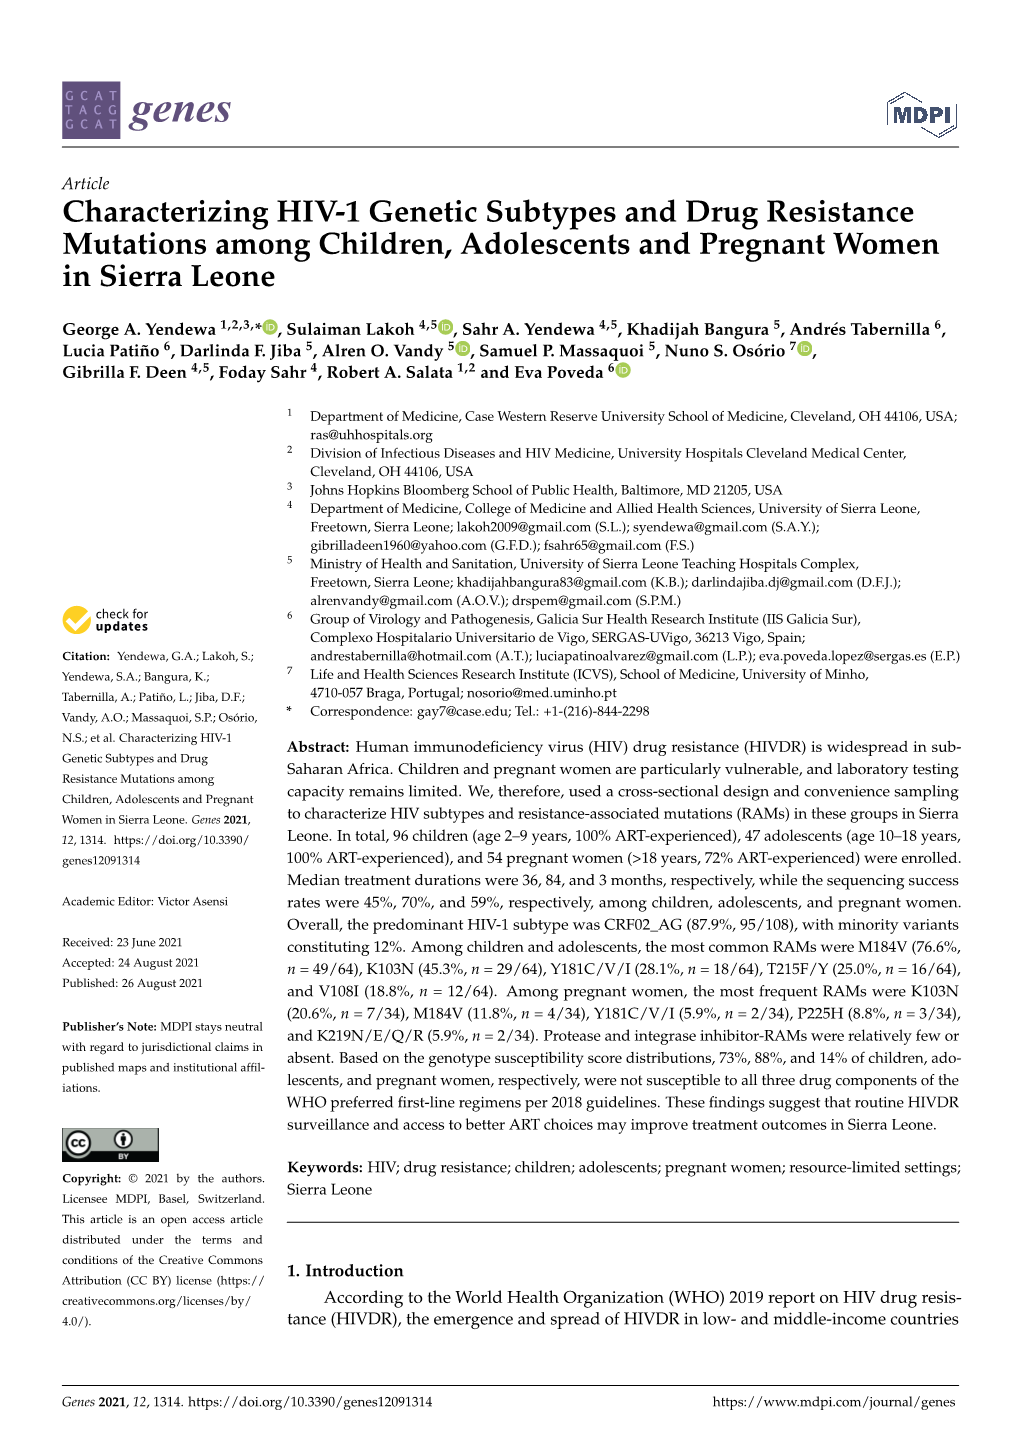 Characterizing HIV-1 Genetic Subtypes and Drug Resistance Mutations Among Children, Adolescents and Pregnant Women in Sierra Leone